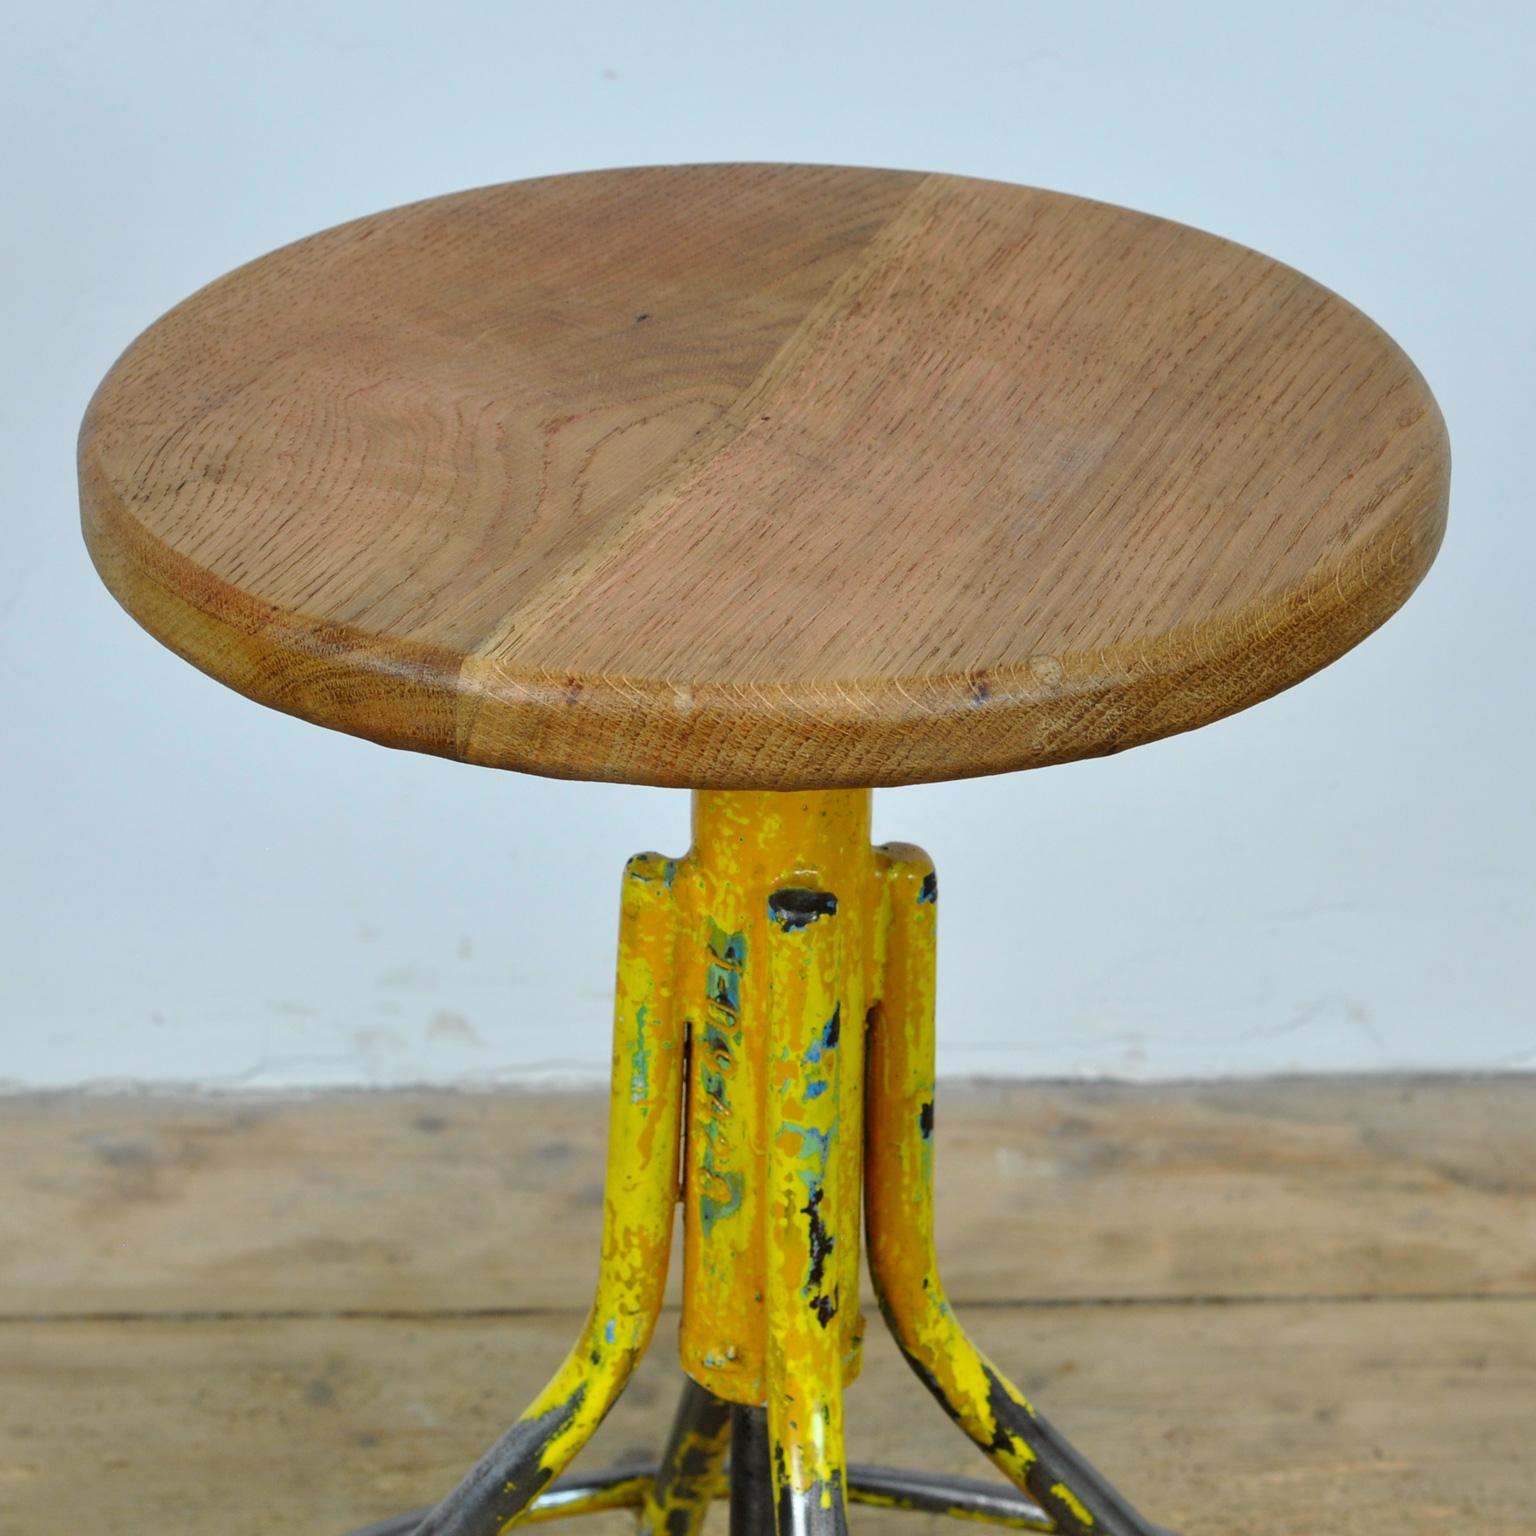 Industrial Swivel Stool, 1960's For Sale 1